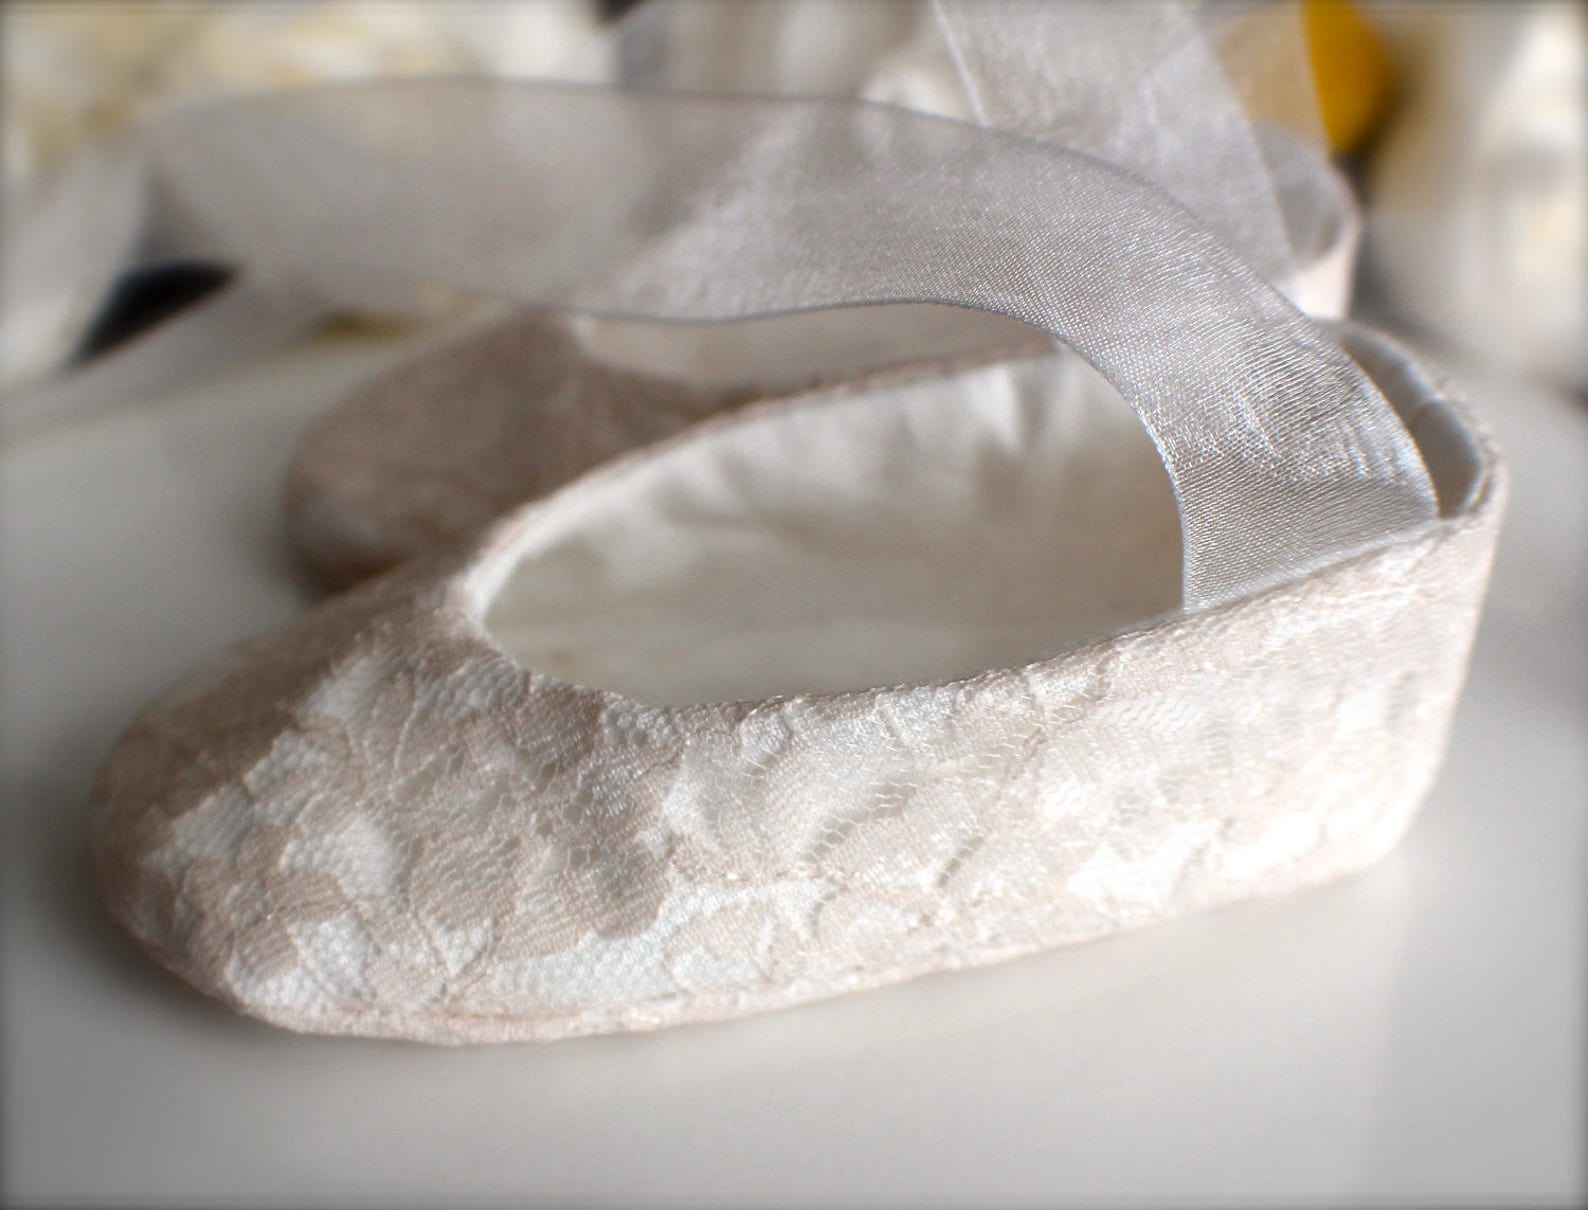 blush lace ballet slippers - flower girl shoes - baby and toddler girl - christening - baptism